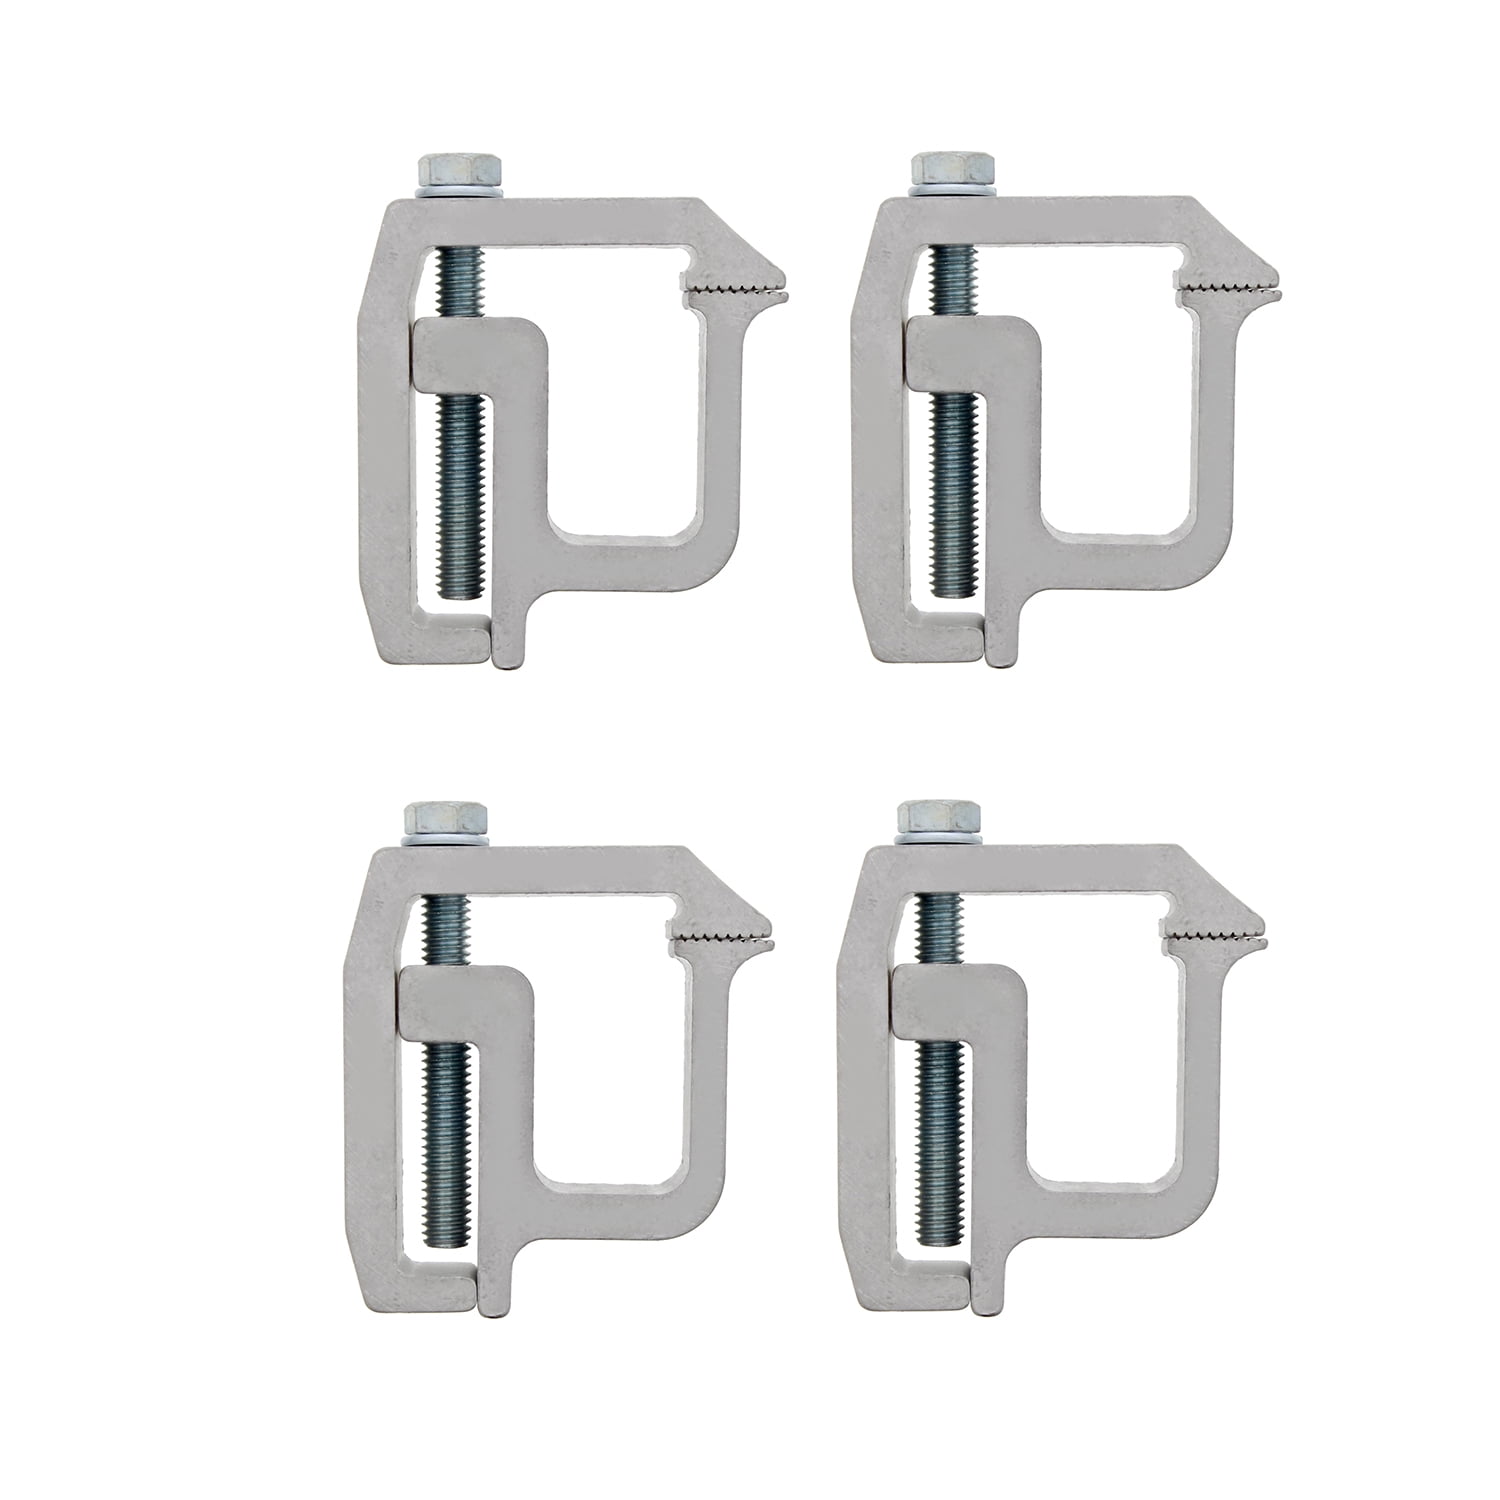 API AC108COMBOP4 Clamps for Mounting Truck Caps on Ford F Series Super Duty Set of 4 